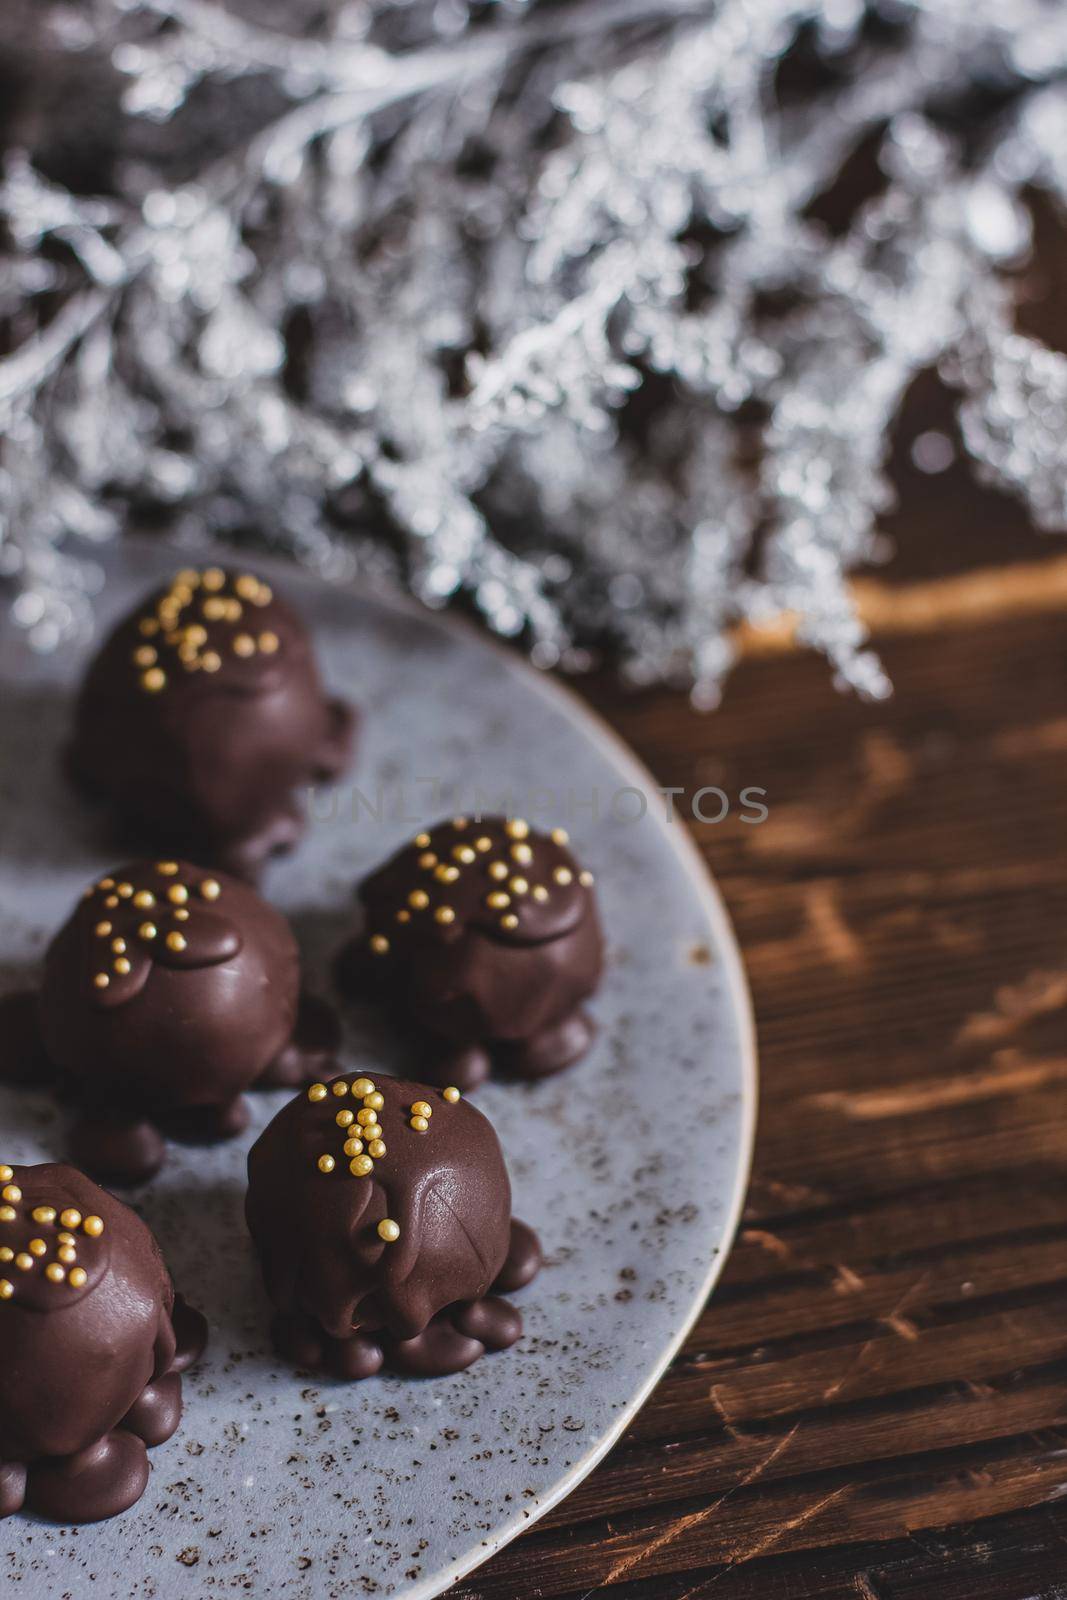 Dark chocolate handmade candy balls on handmade plate on dark wooden background with the cup of tea in a white cup.